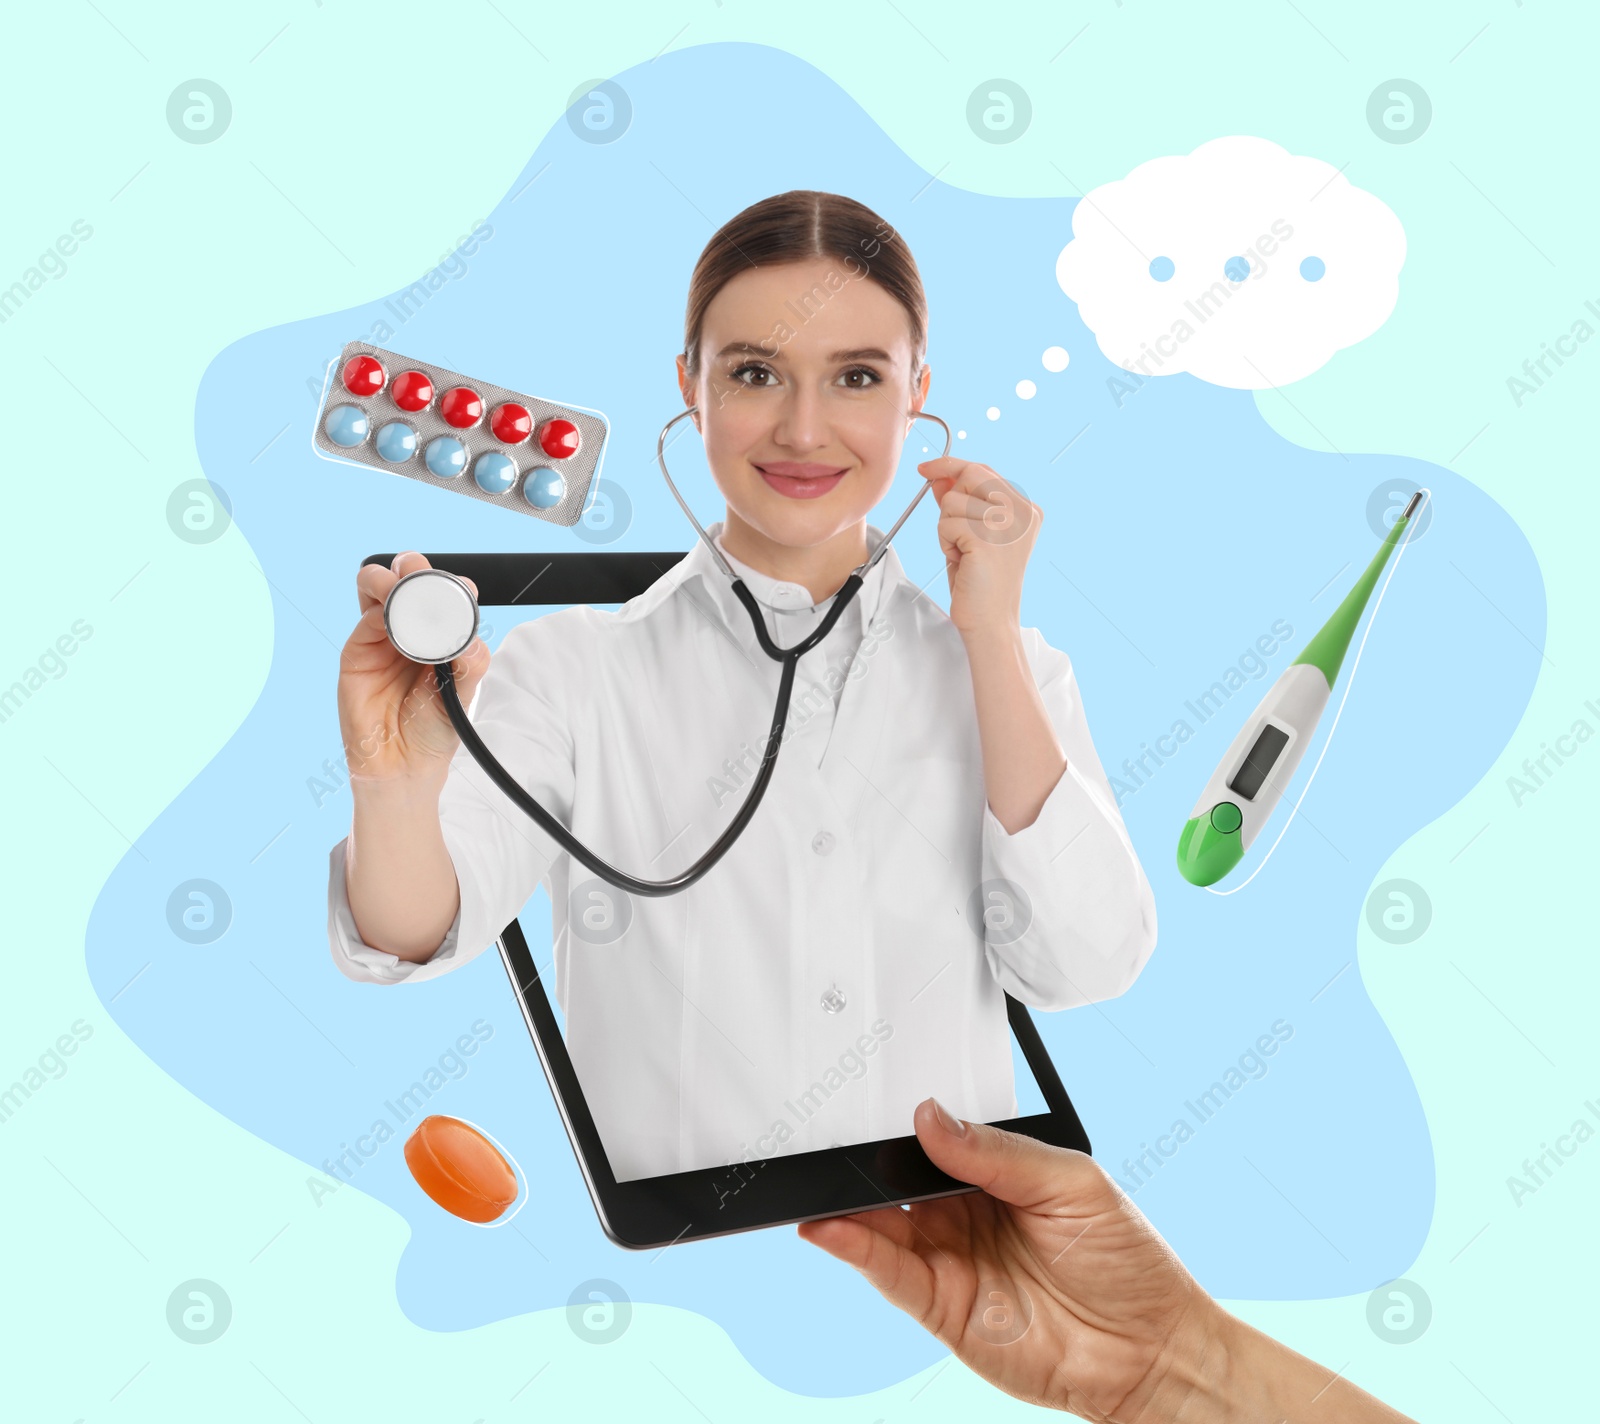 Image of Online medicine. Closeup view of woman having appointment with doctor via tablet on color background